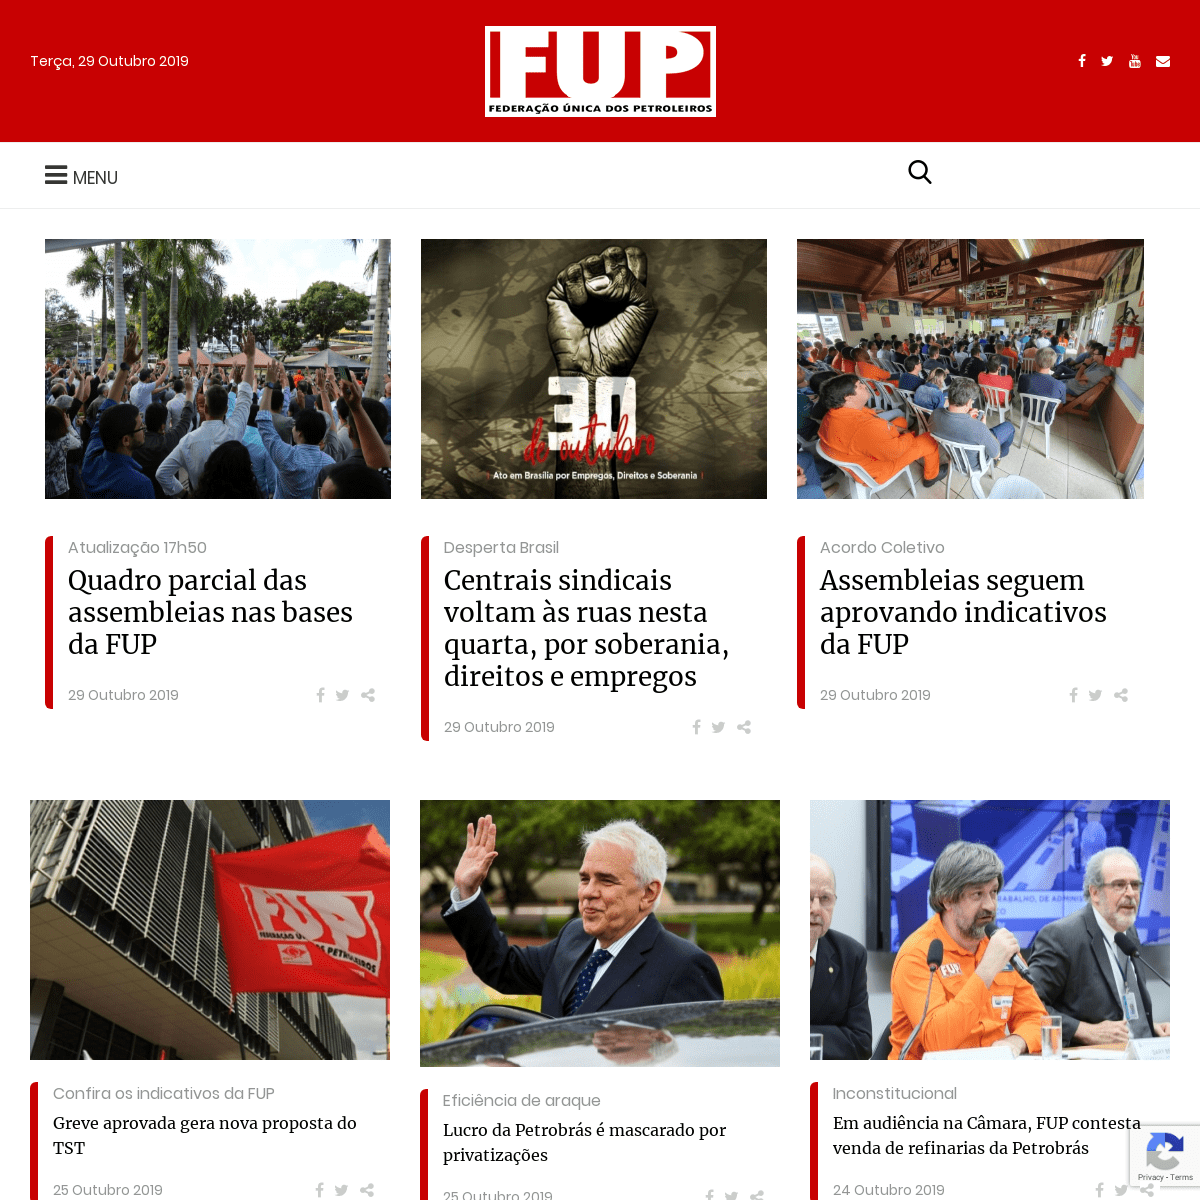 A complete backup of fup.org.br